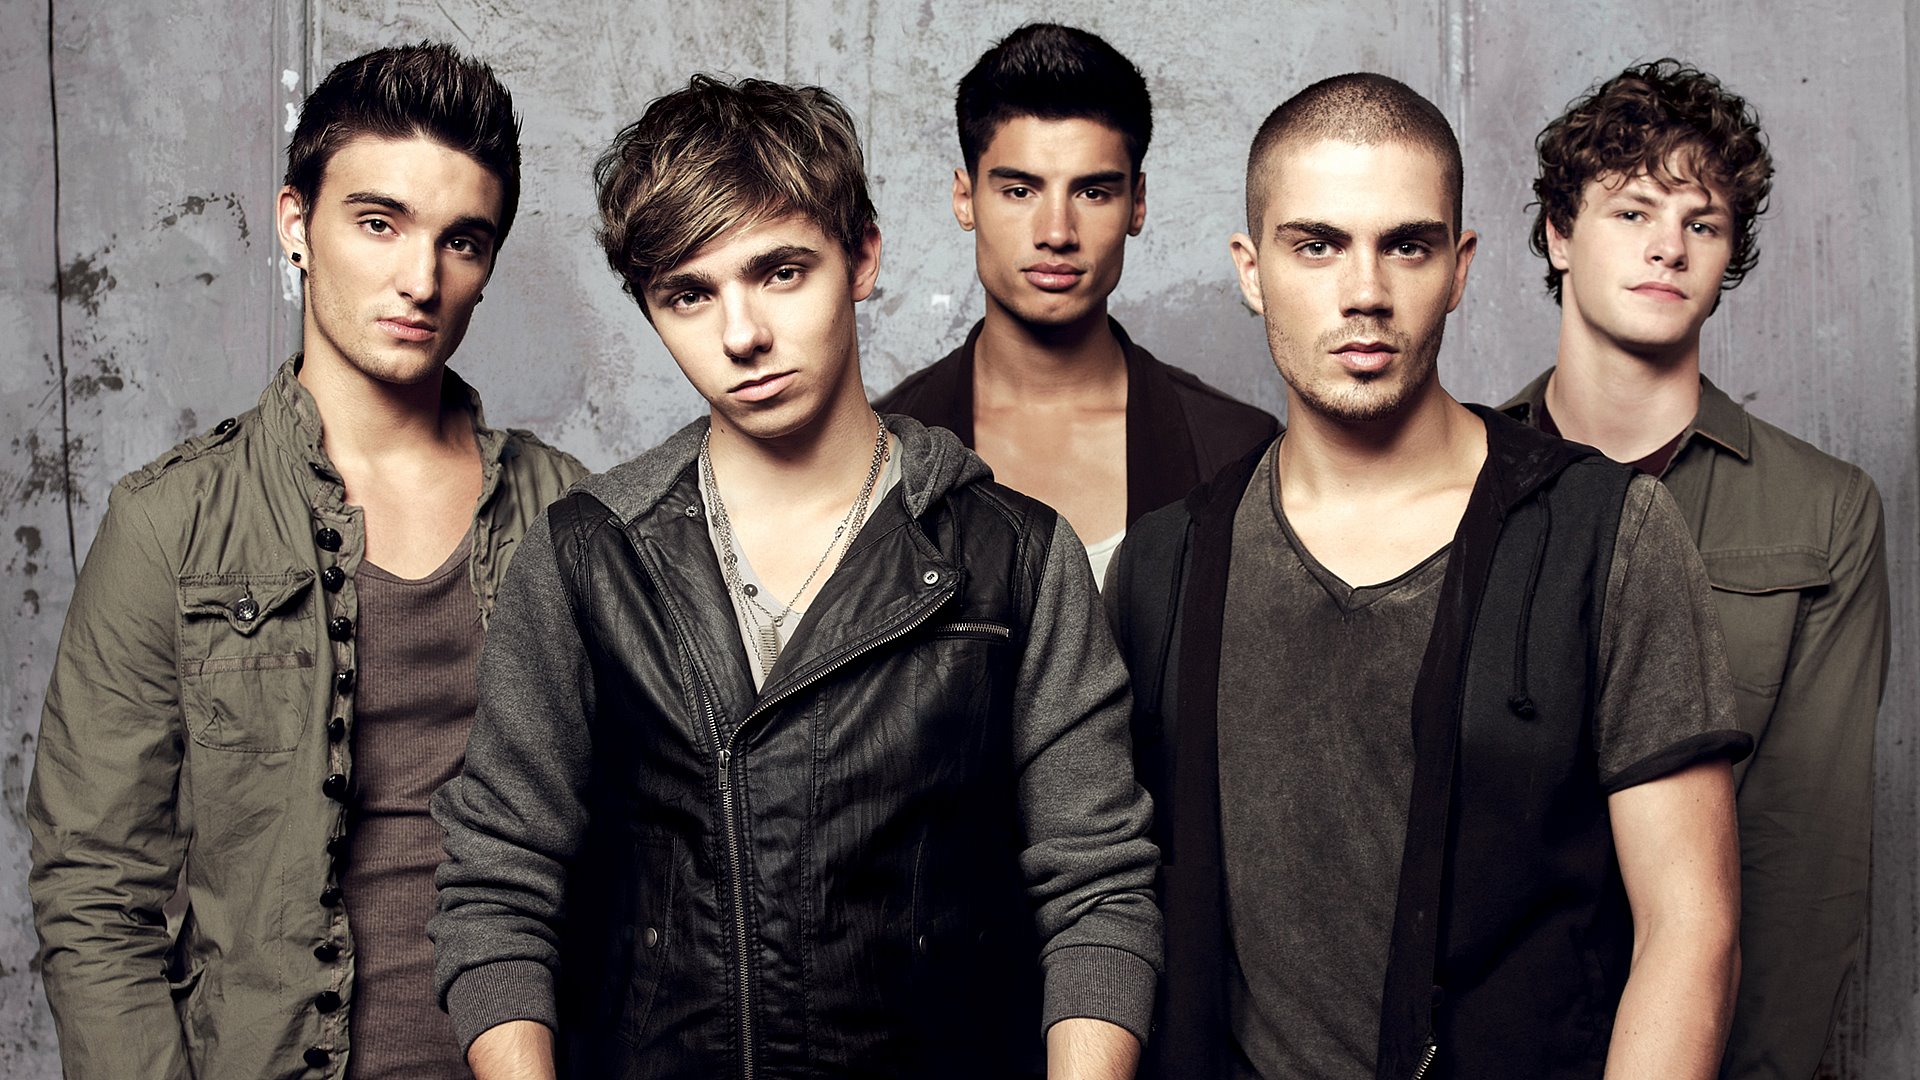 The. Группа the wanted. Want. Группа the wanted участники. Группа the wanted 2020.